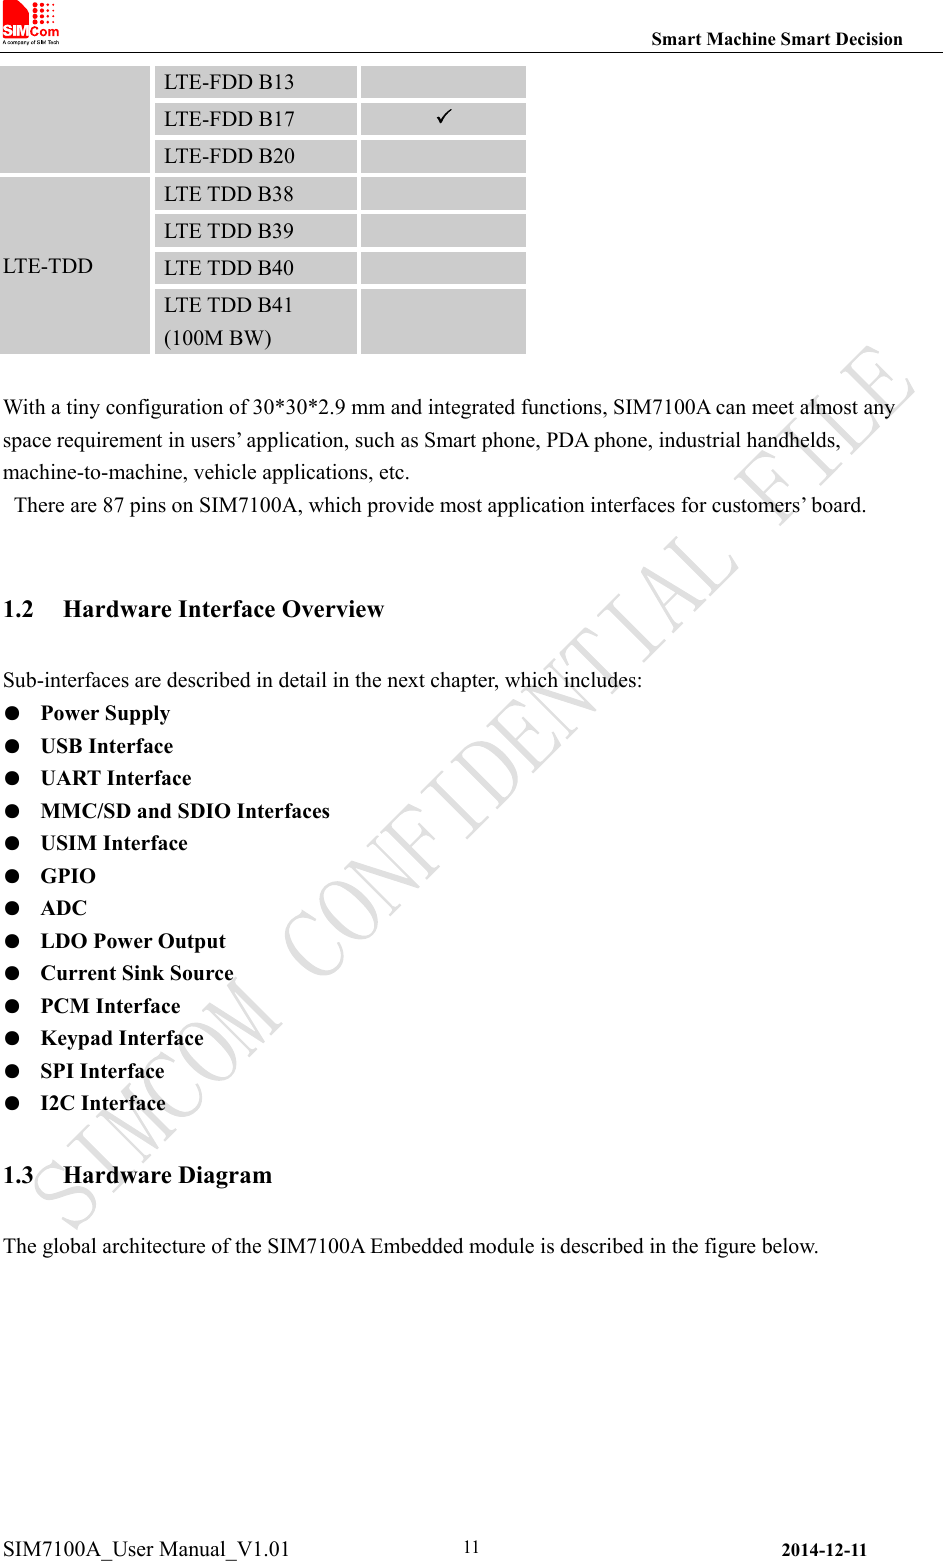                                                                Smart Machine Smart Decision SIM7100A_User Manual_V1.01                2014-12-11 11LTE-FDD B13   LTE-FDD B17   LTE-FDD B20   LTE-TDD LTE TDD B38   LTE TDD B39   LTE TDD B40   LTE TDD B41 (100M BW)    With a tiny configuration of 30*30*2.9 mm and integrated functions, SIM7100A can meet almost any space requirement in users’ application, such as Smart phone, PDA phone, industrial handhelds, machine-to-machine, vehicle applications, etc.   There are 87 pins on SIM7100A, which provide most application interfaces for customers’ board.  1.2 Hardware Interface Overview Sub-interfaces are described in detail in the next chapter, which includes: ●  Power Supply ●  USB Interface ●  UART Interface ●  MMC/SD and SDIO Interfaces ●  USIM Interface ●  GPIO ●  ADC ●  LDO Power Output ●  Current Sink Source ●  PCM Interface ●  Keypad Interface ●  SPI Interface ●  I2C Interface 1.3 Hardware Diagram The global architecture of the SIM7100A Embedded module is described in the figure below.  